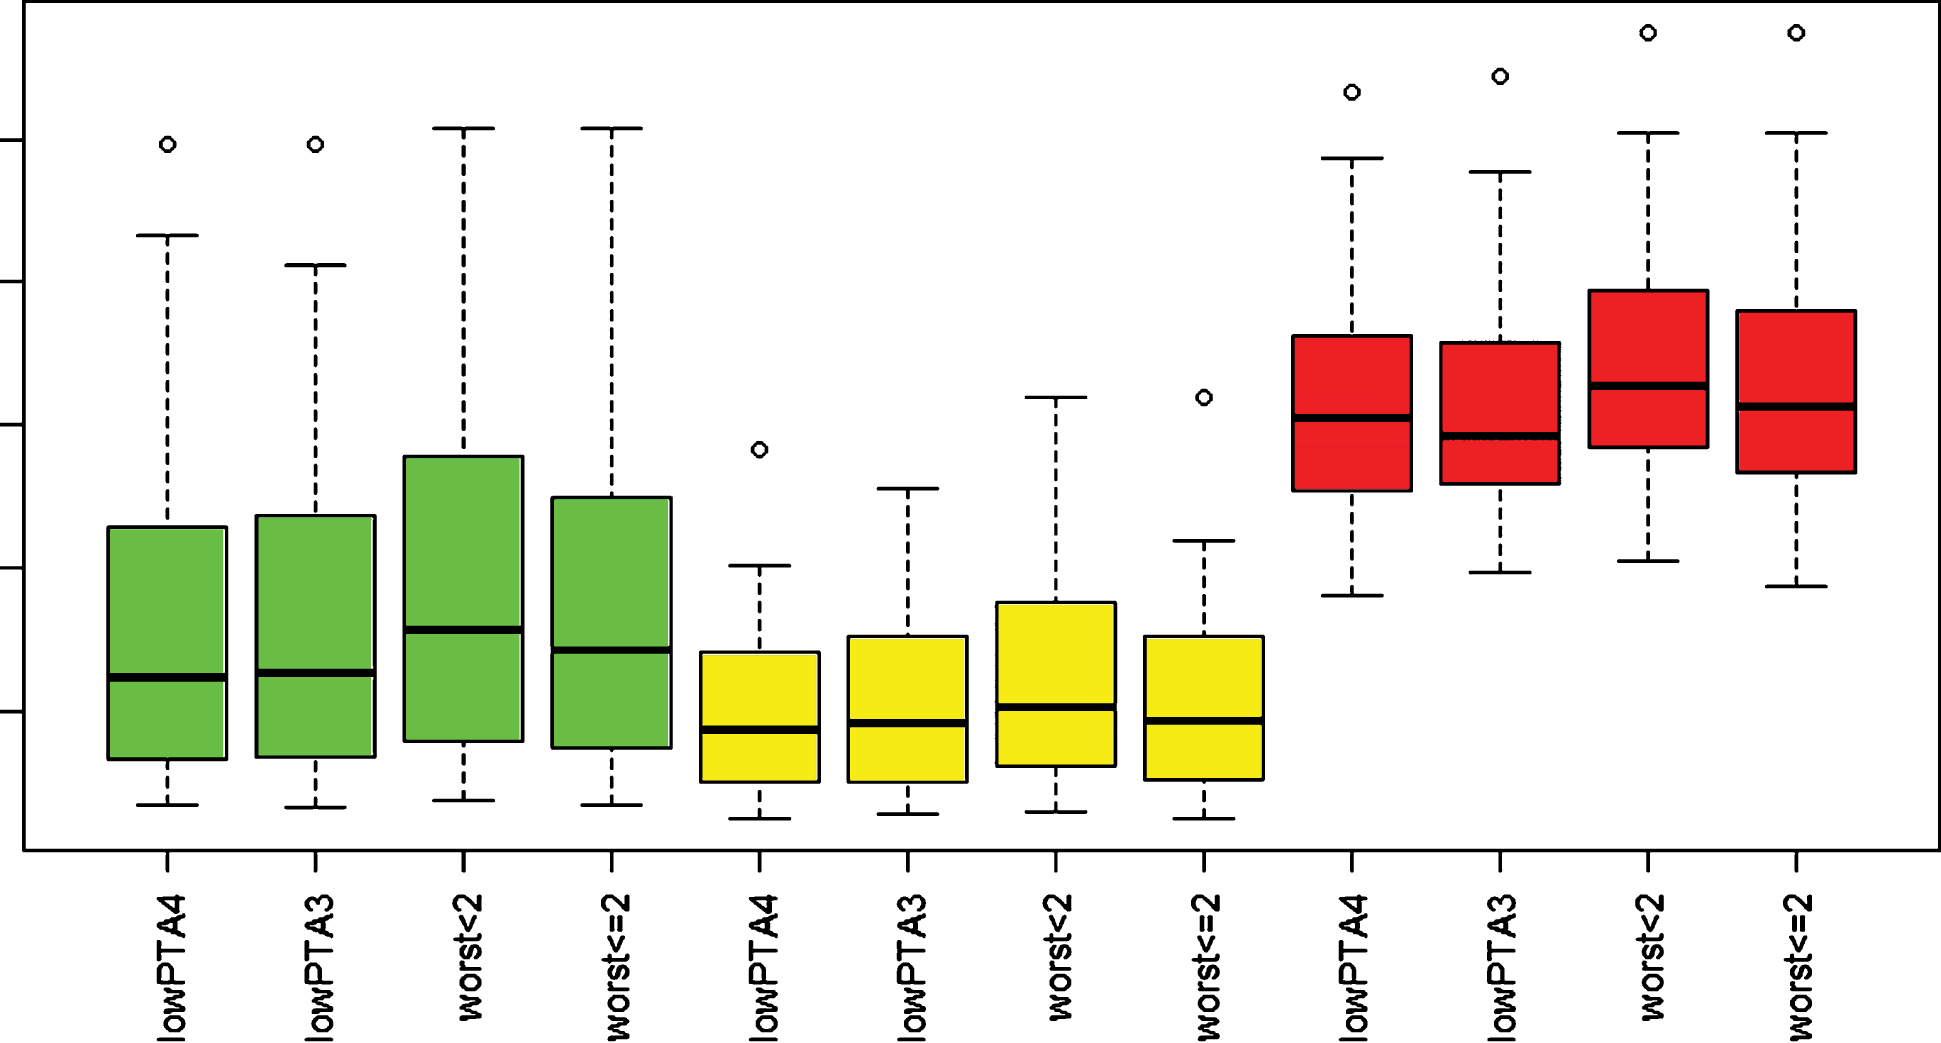 Overview of pure tone average values according to diagnostic categories. Yellow, definite Menière’s disease (dMD); red, probable Menière’s disease (pMD); green, Menière’s characteristics (MC). Horizontal bar, median value; box, interqartile range (IQR, 25th to 75th percentile); whiskers, maximum or minimum within 1.5*IQR; circles, outliers.